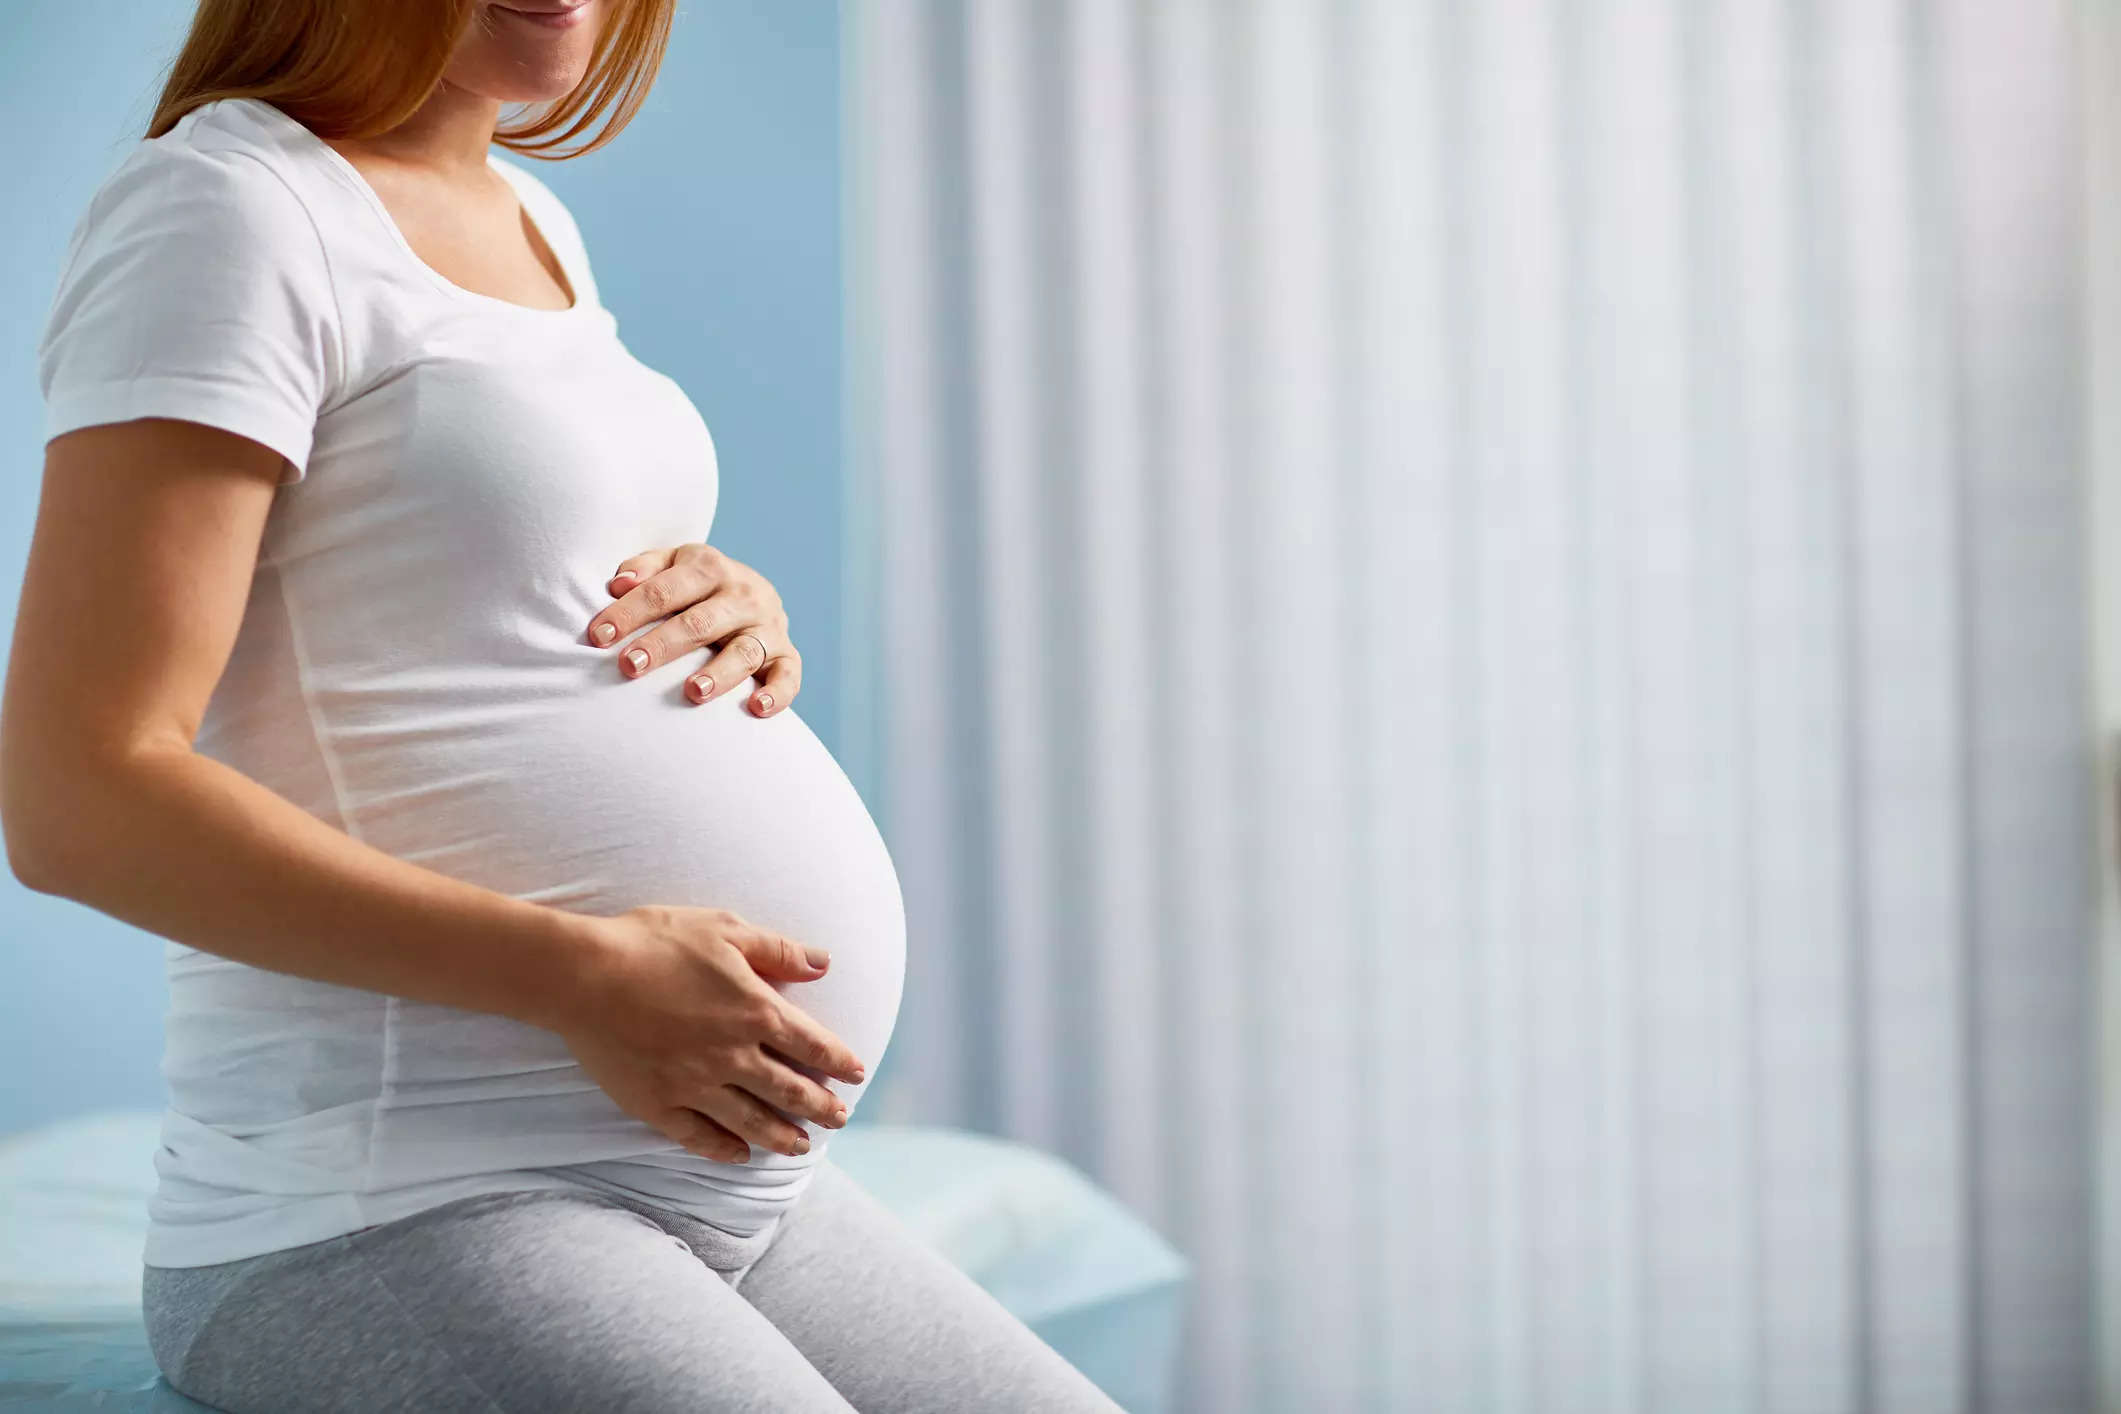 The Indian government has recently come up with the new Medical Termination of Pregnancy Rules, 2021, which defines eligibility criteria for termination of pregnancy up to 24 weeks from the previous limit of 20 weeks.